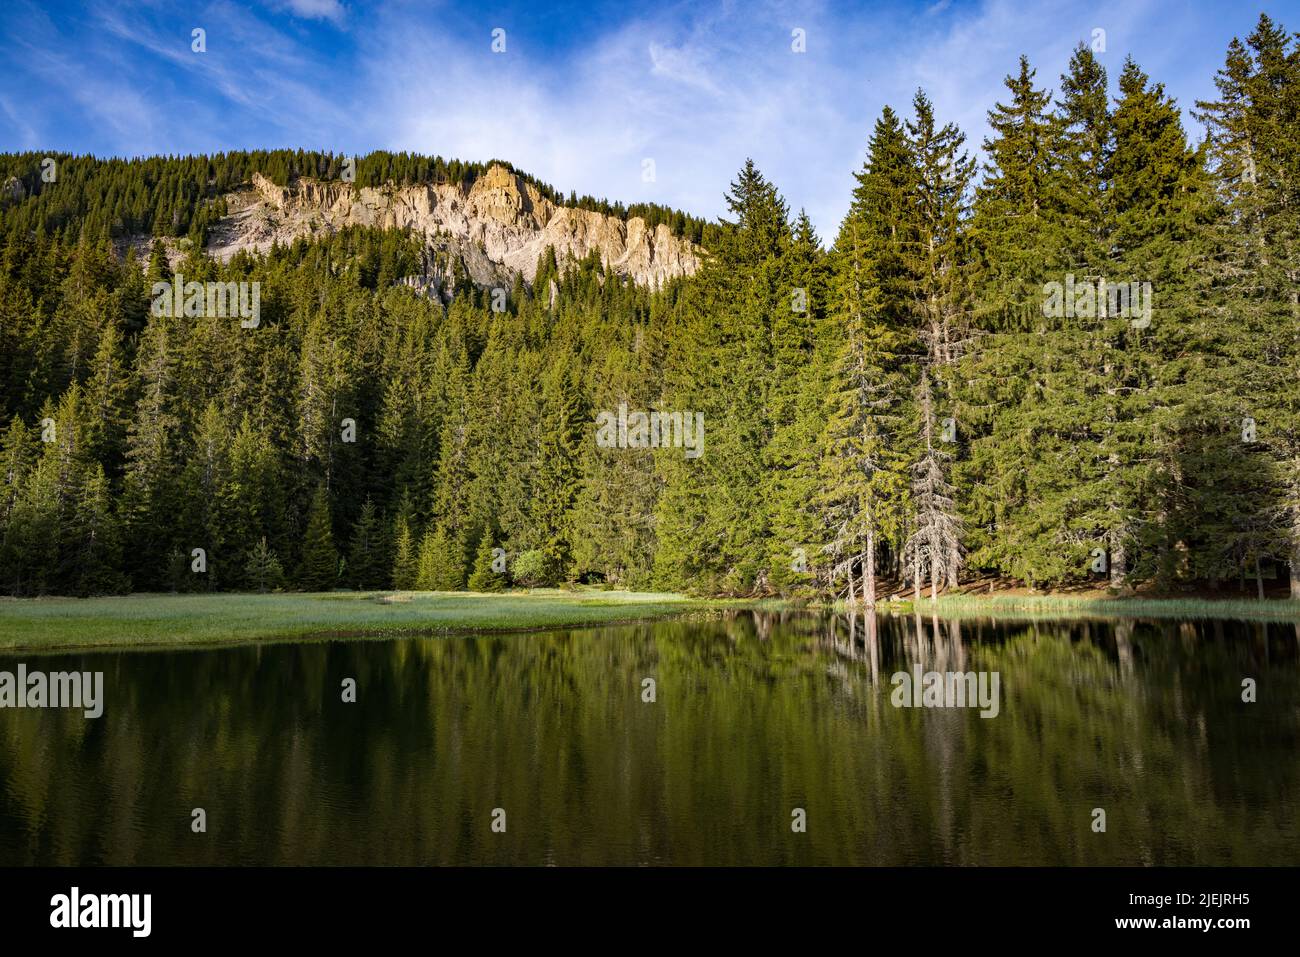 A small blue reflecting lake and clear mountain cool water with stone narrow wild shore in evergreen coniferous spruce forest with tall fluffy thorny Stock Photo